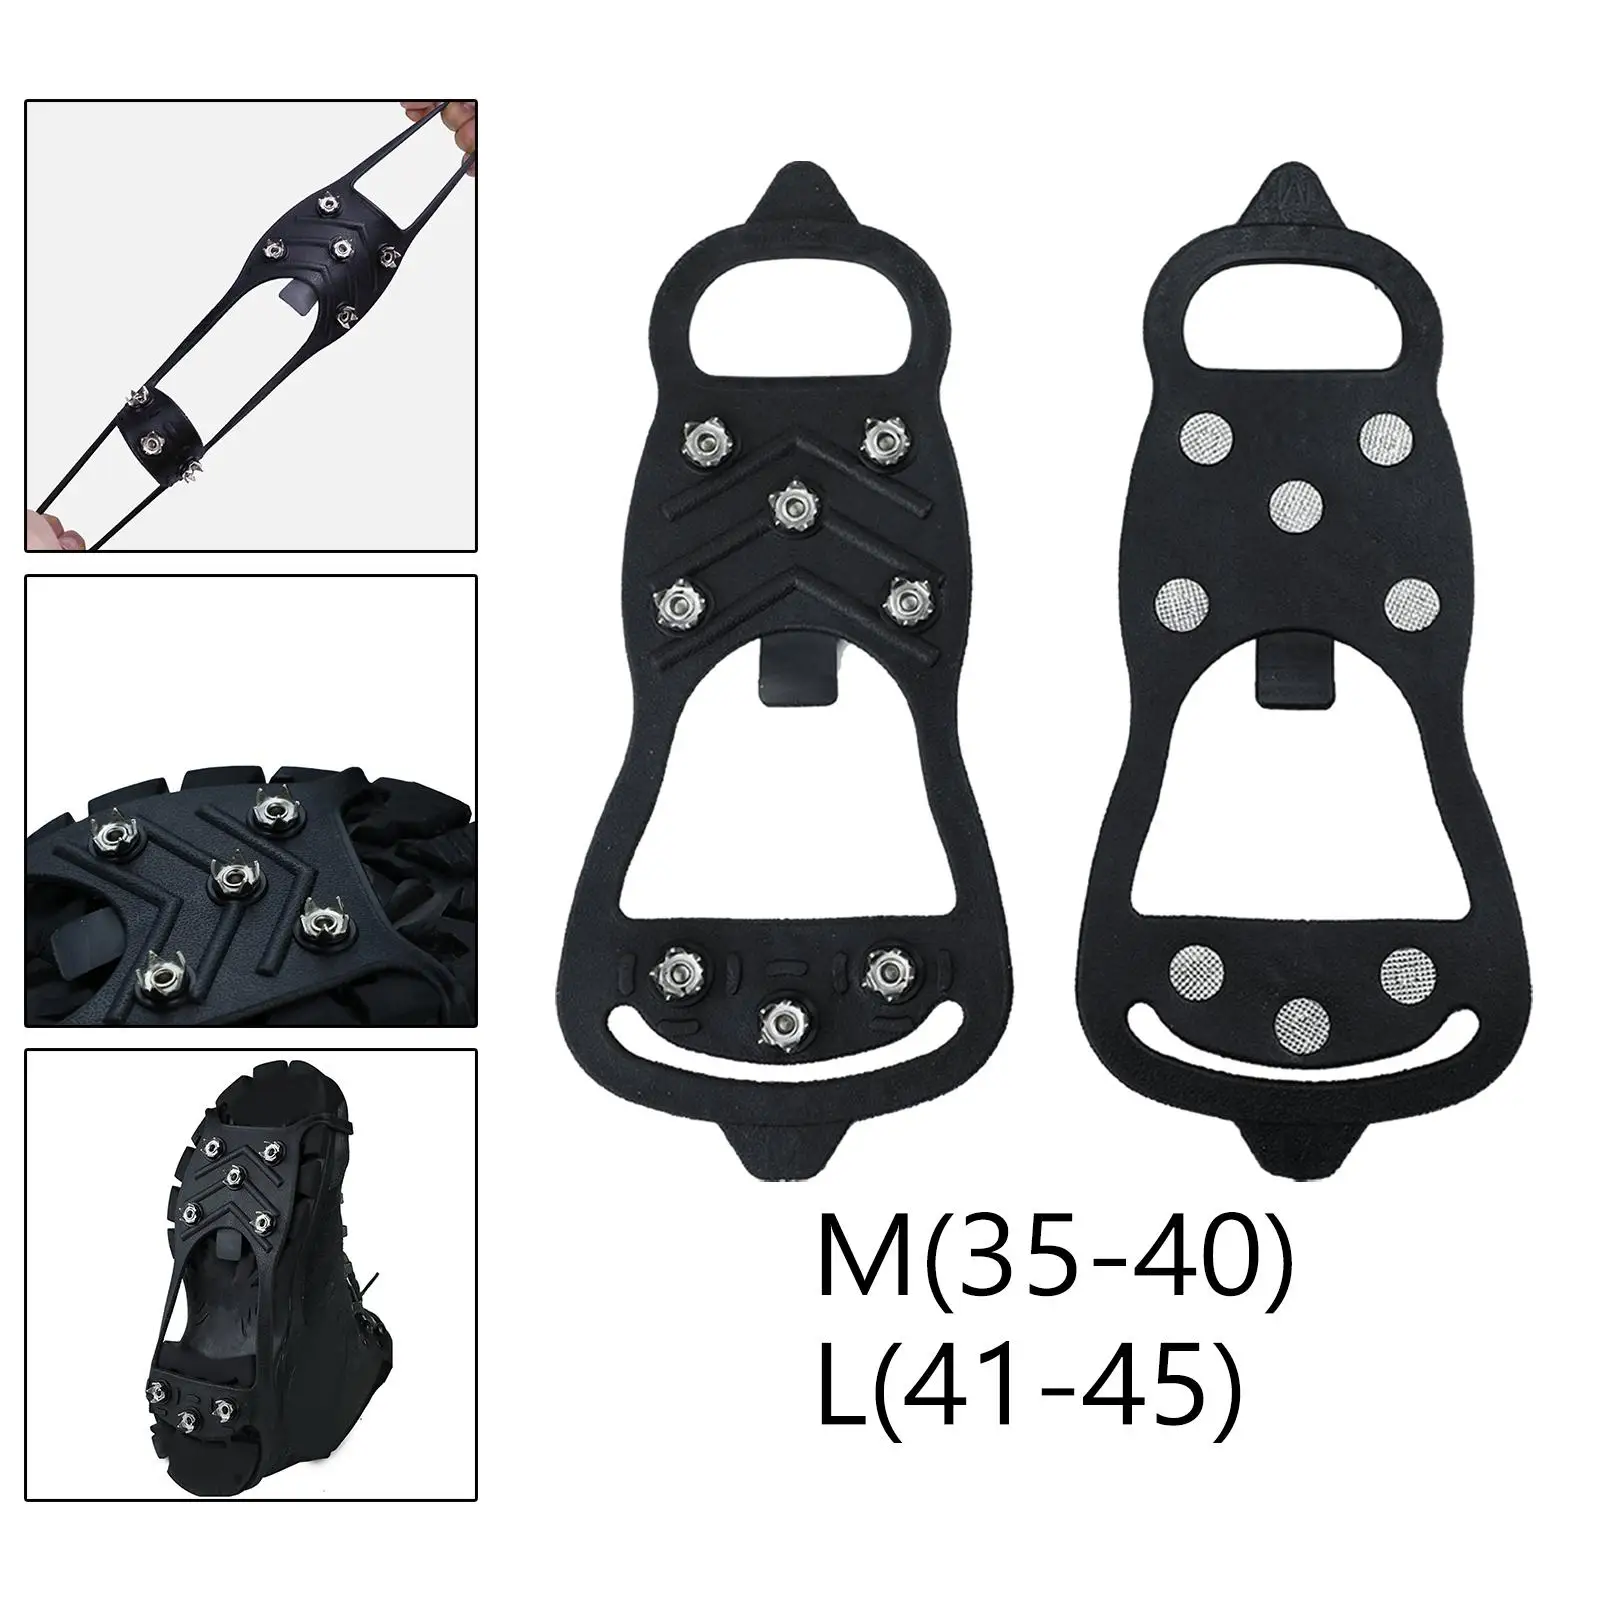 1 Pair 8 Spikes Crampons Non Slip Traction Crampon Spikes Grips for Walking on Snow and Ice Winter Mountain Roads Mountaineering